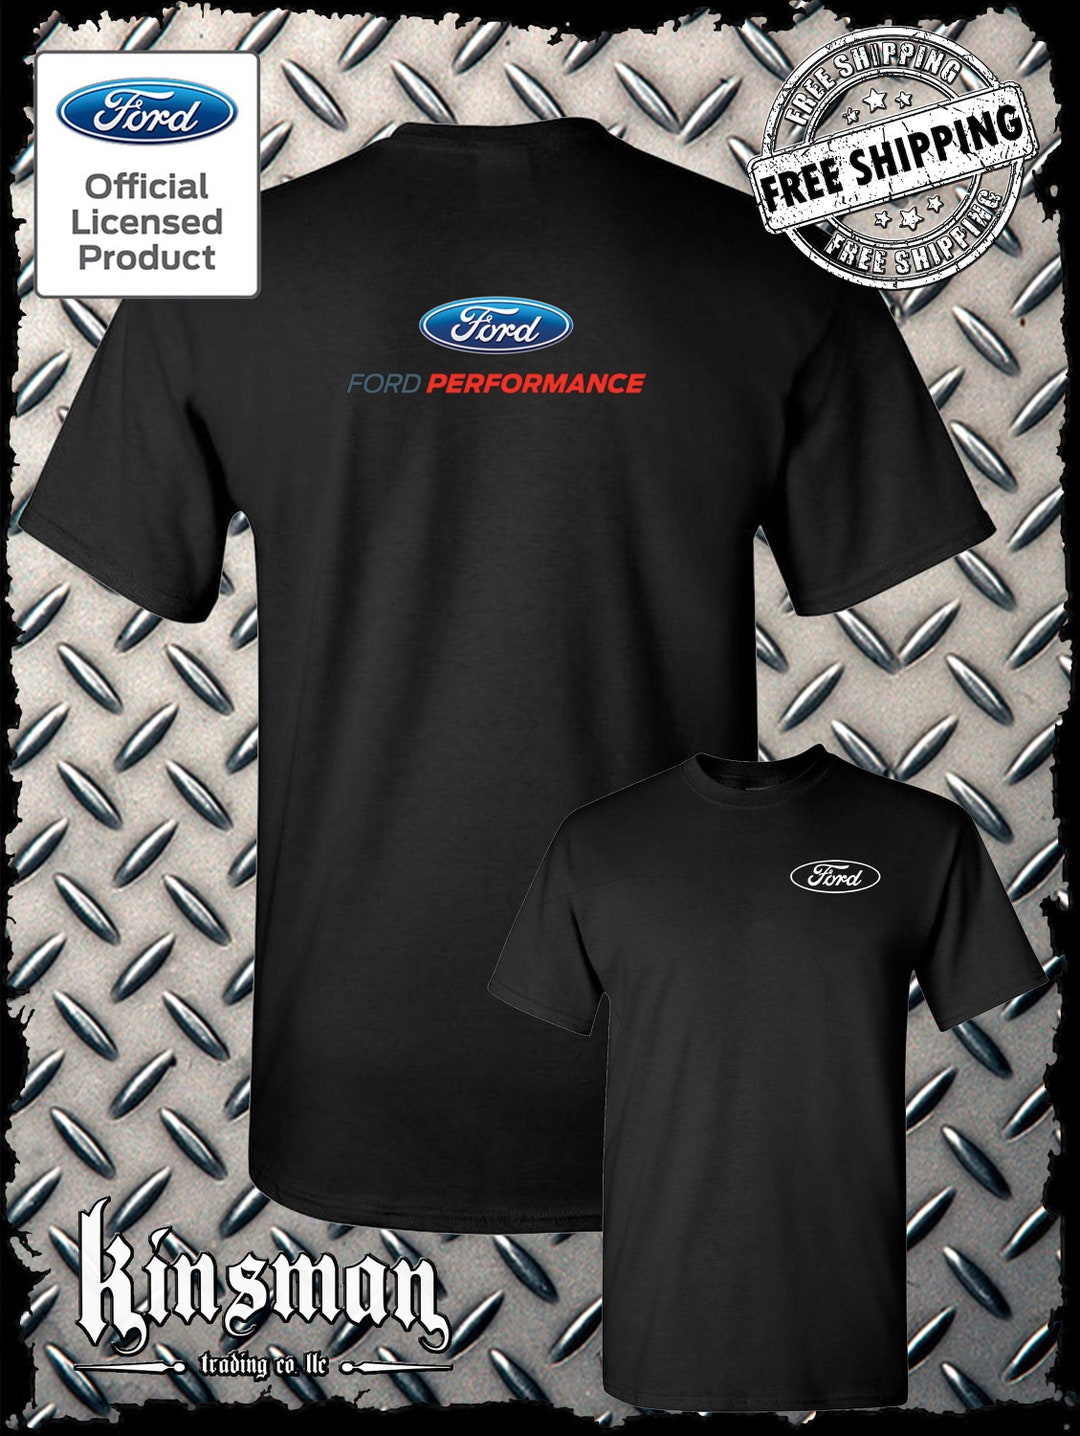 Licensed Ford Crest / Performance Logo 2-sided T-shirt Mustang F-150 - Etsy